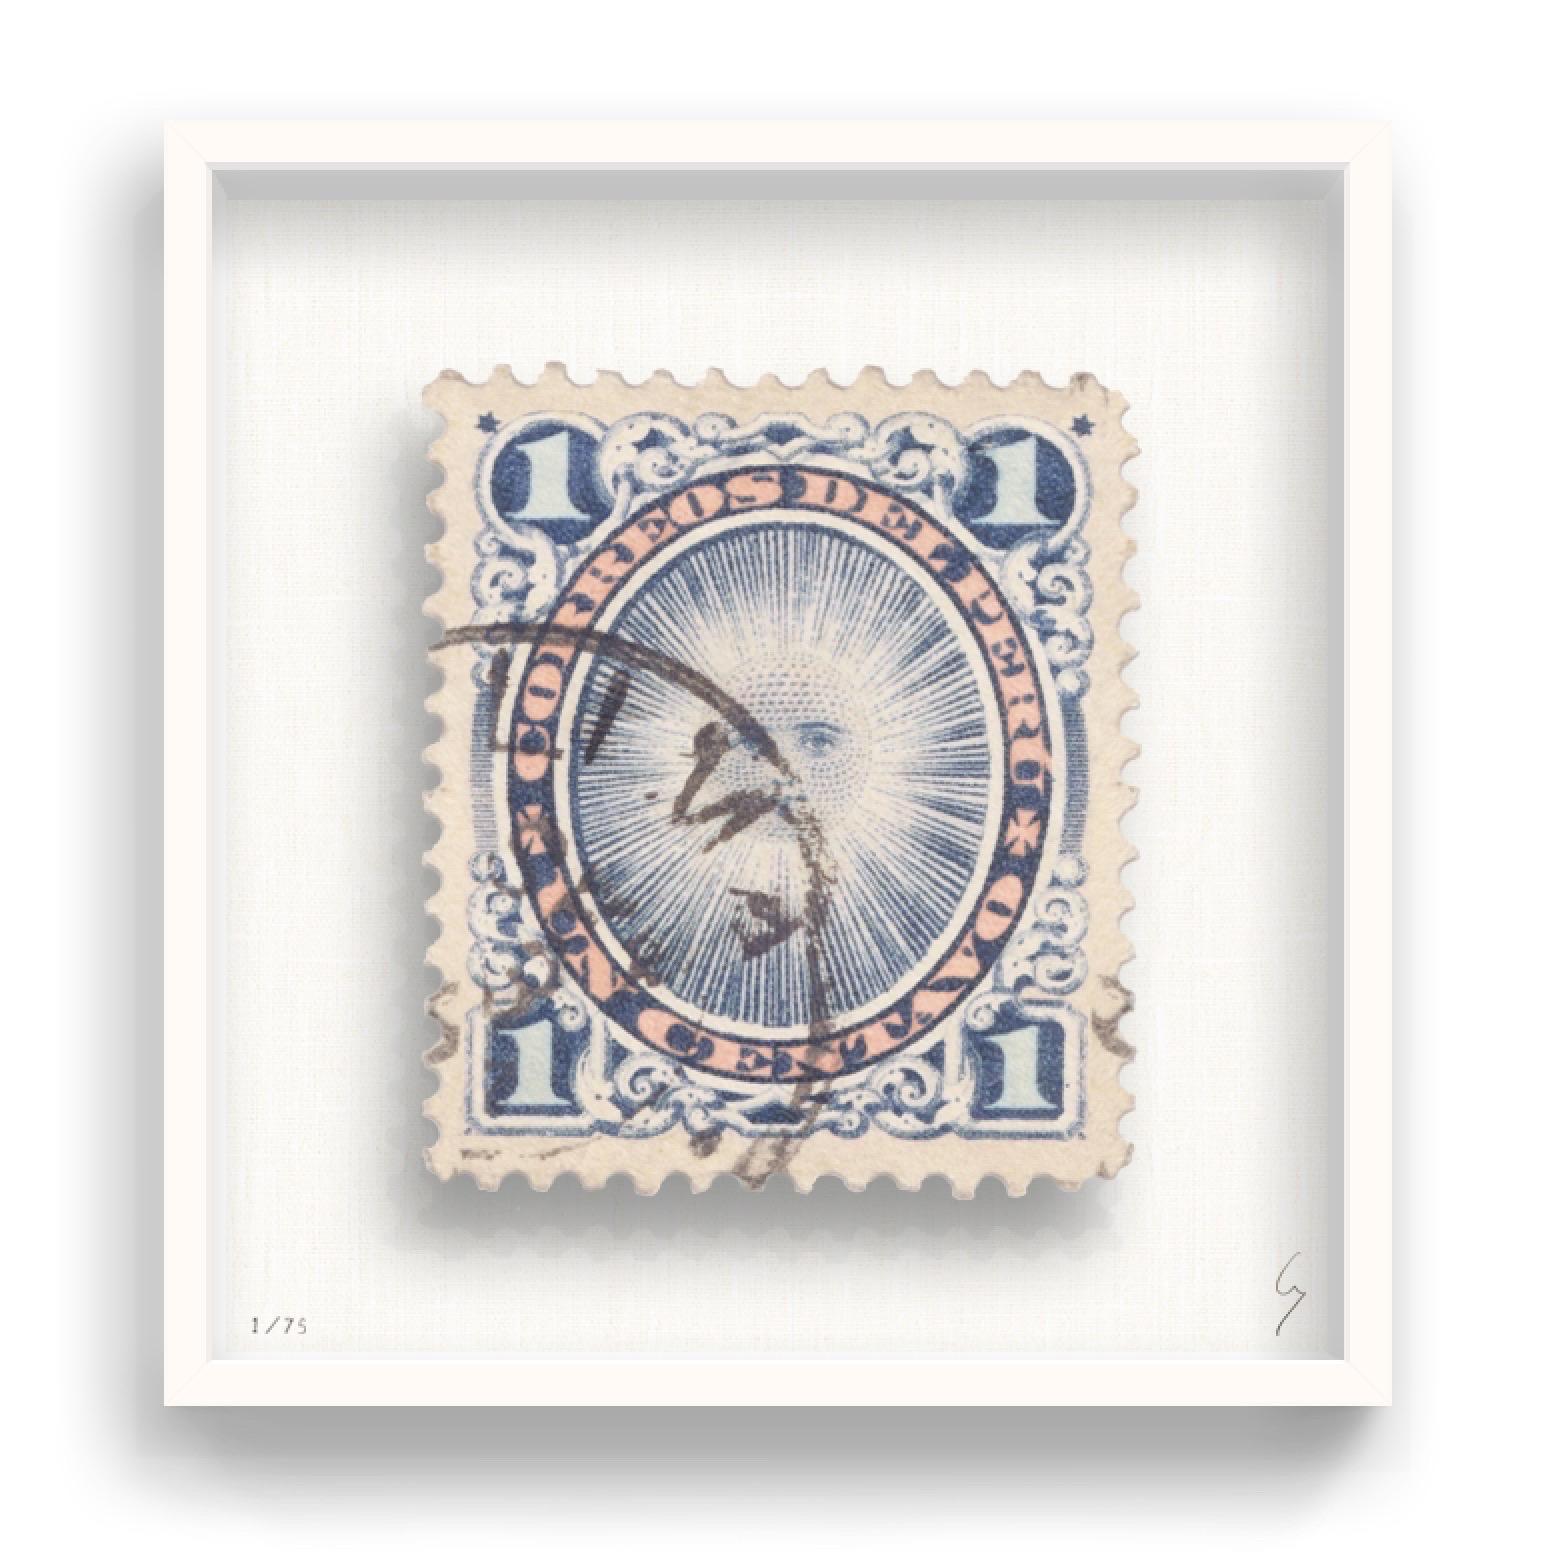 Guy Gee, Peru (medium)

Hand-engraved print on 350gsm on G.F Smith card
31 x 35 cm (12 1/5 x 13 4/5)
Frame included 
Edition of 75 

Each artwork by Guy had been digitally reimagined from an original postage stamp. Cut out and finished by hand, the